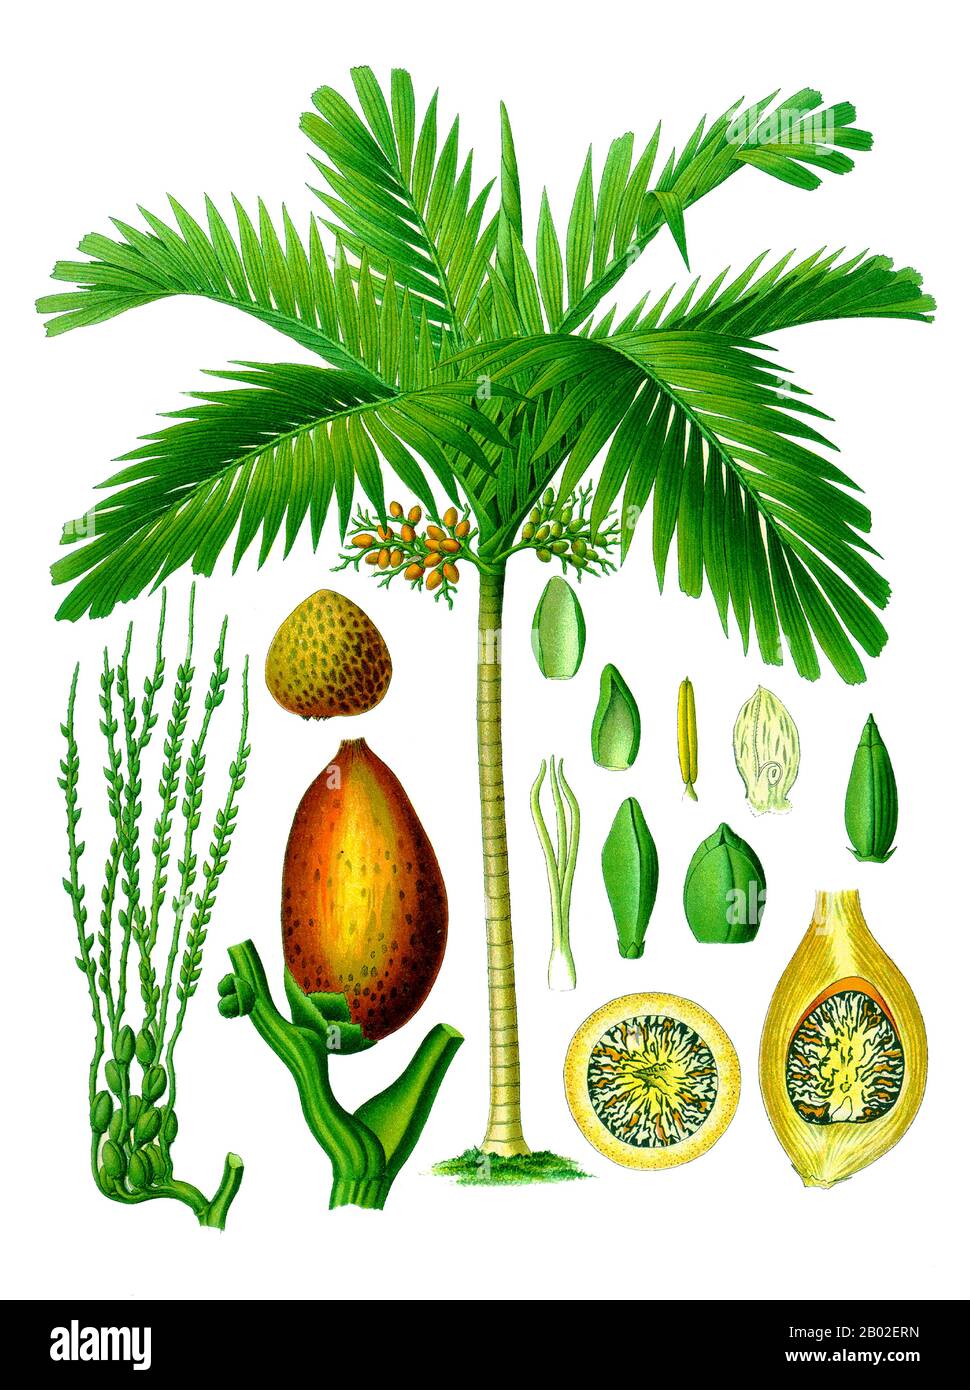 Areca catechu is the areca palm or areca nut palm betel palm, Filipino: bunga, Indonesia/Malay: pinang, Malayalam: അടക്ക adakka, Kannada: ಅಡಿಕೆ Adike), a species of palm which grows in much of the tropical Pacific, Asia, and parts of east Africa.  The palm is believed to have originated in either Indonesia/Malaysia or the Philippines. Areca is derived from a local name from the Malabar Coast of India and catechu is from another Malay name for this palm, caccu.  This palm is often called the betel tree because its fruit, the areca nut, is often chewed along with the betel leaf, a leaf from a vi Stock Photo